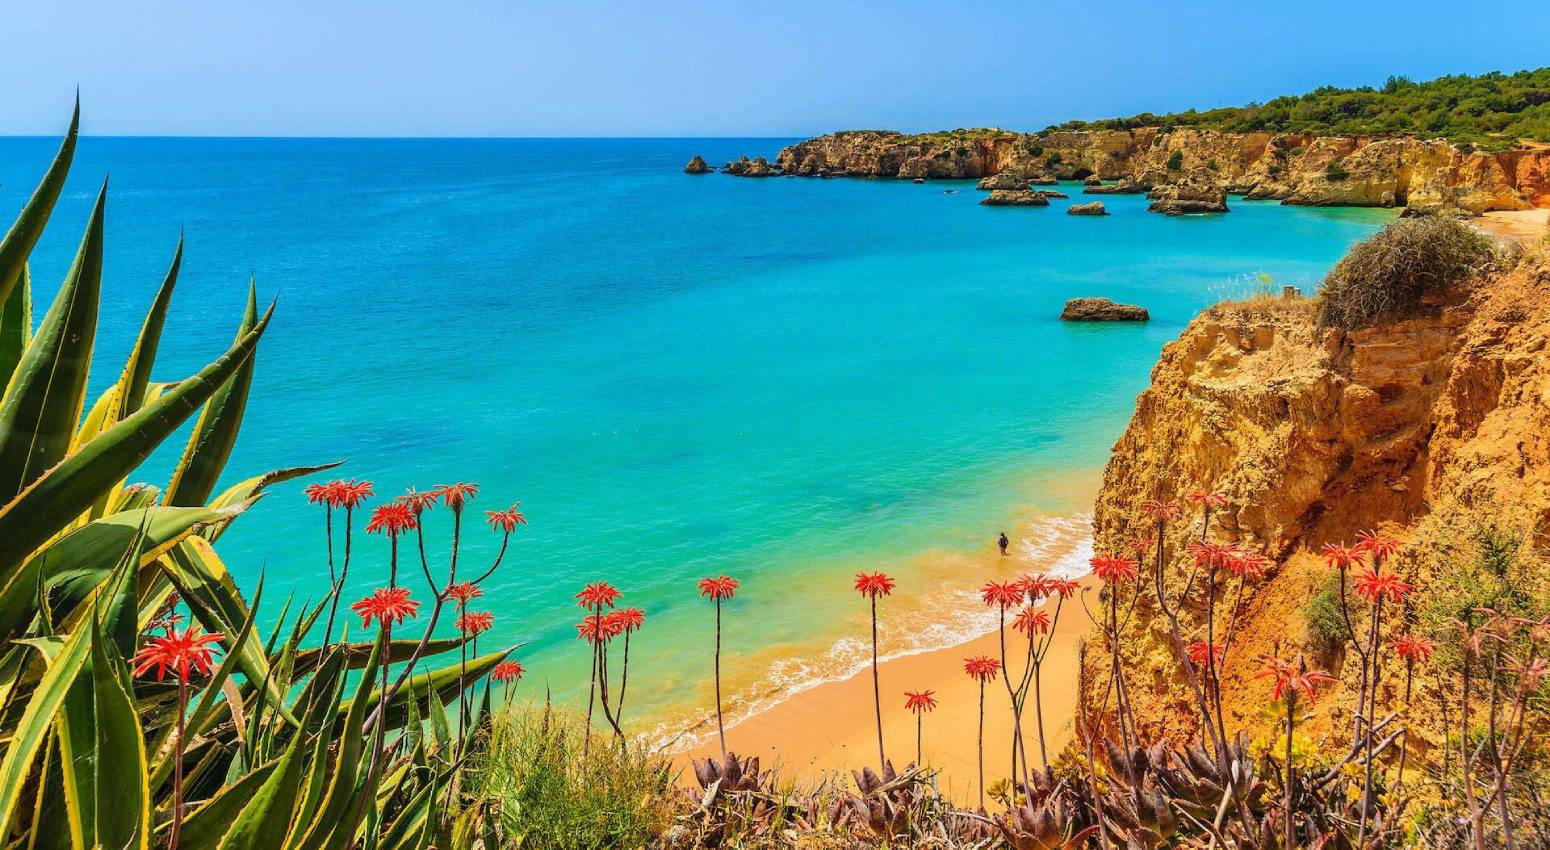 The beautiful island scenery of Cape Verde with turquoise watrs and sandy beach, part of Variety Cruises' small ship cruises